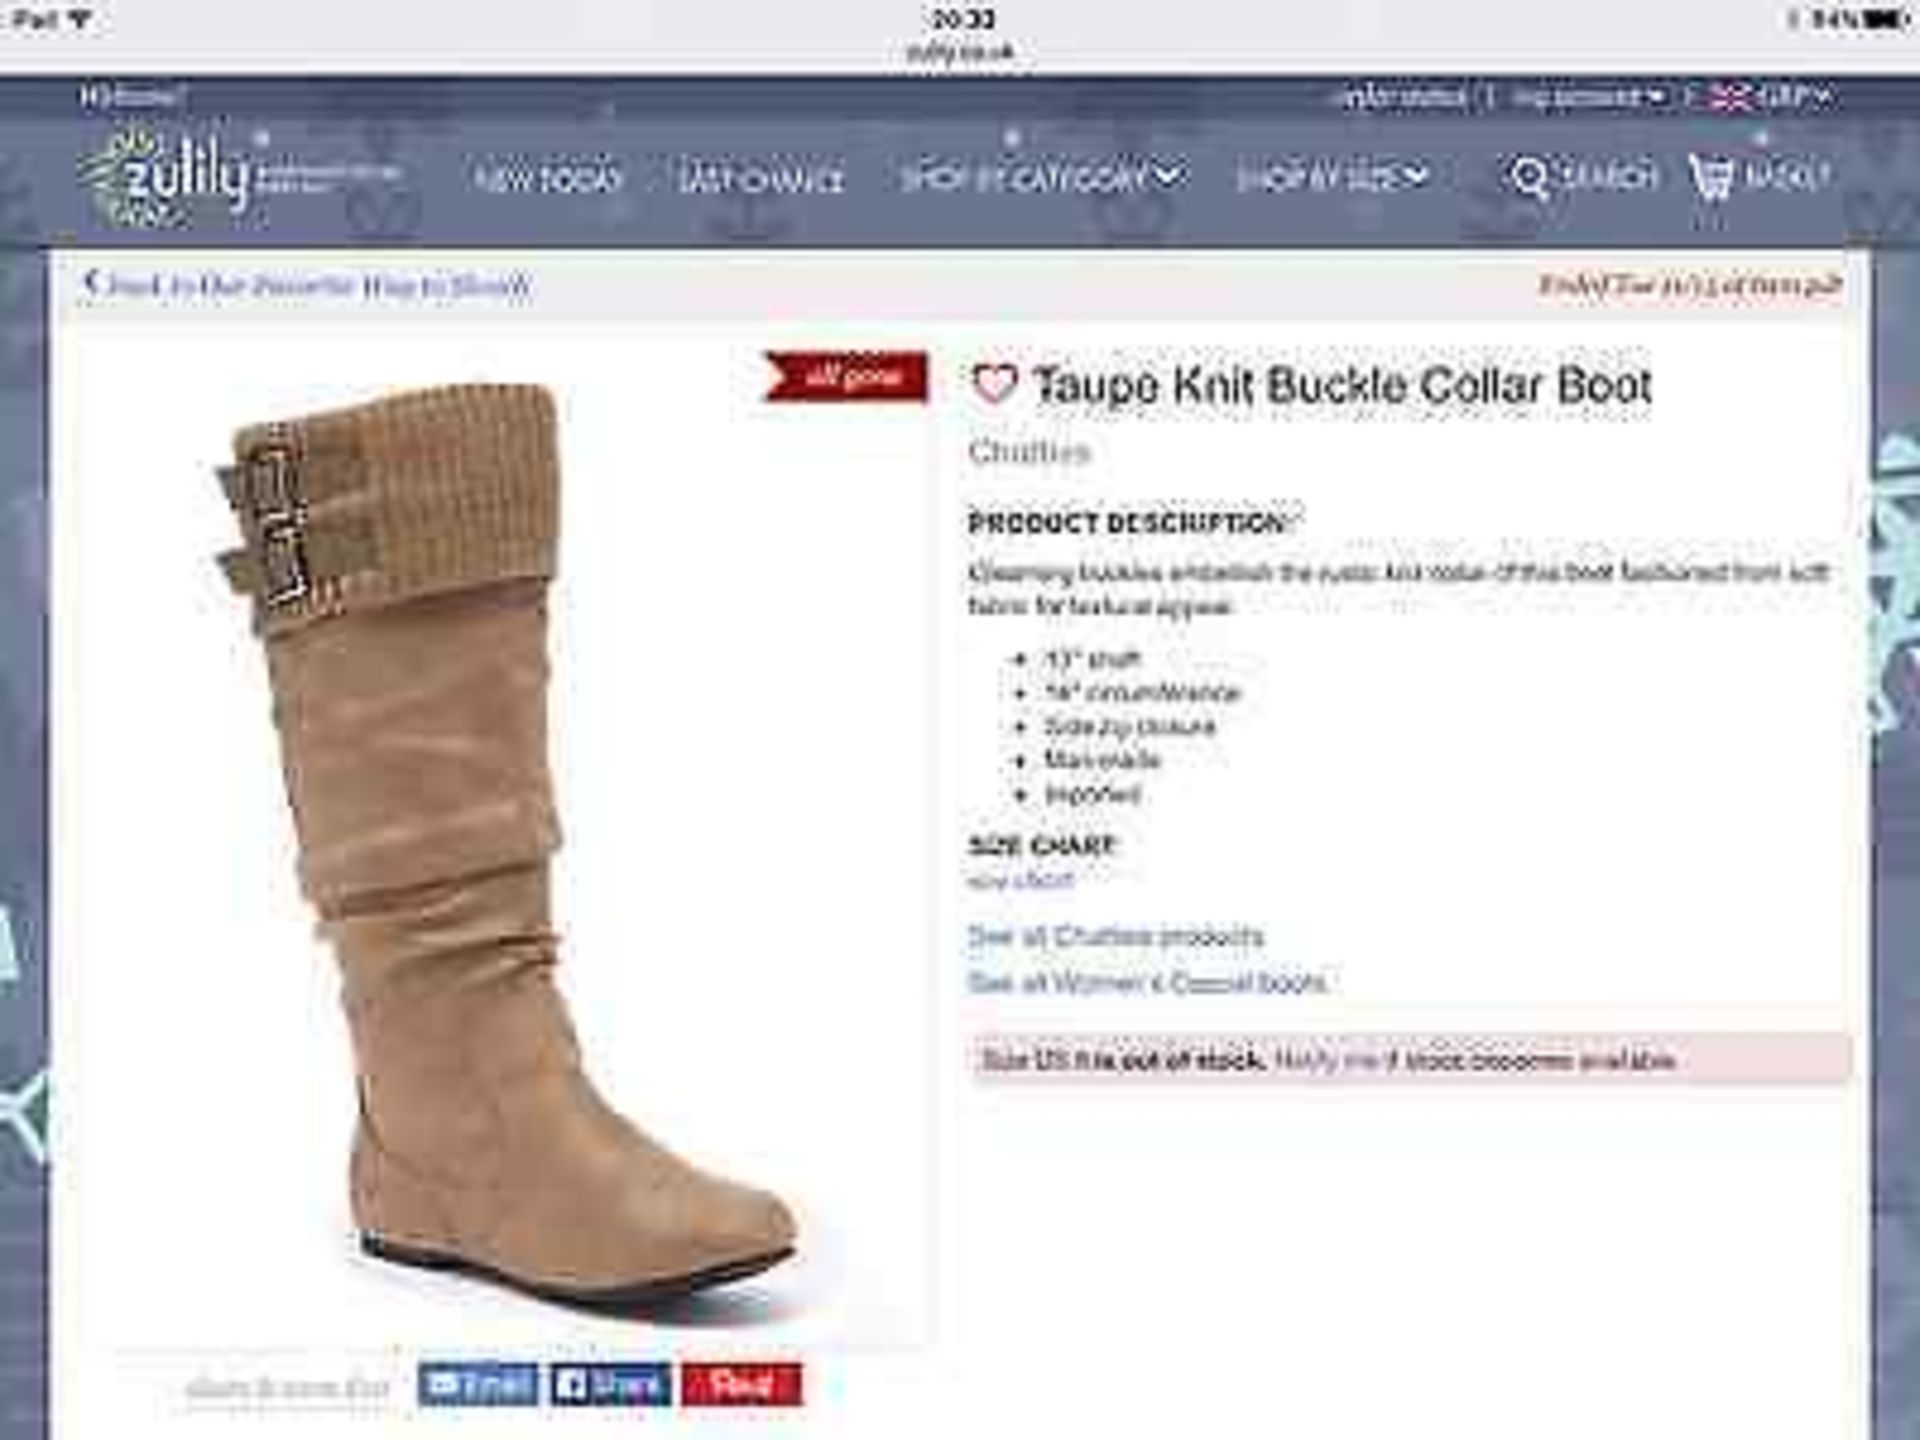 Chatties Taupe Knit Buckle Collar Boot, Size Eur 38.5 (New without box) - Image 2 of 3